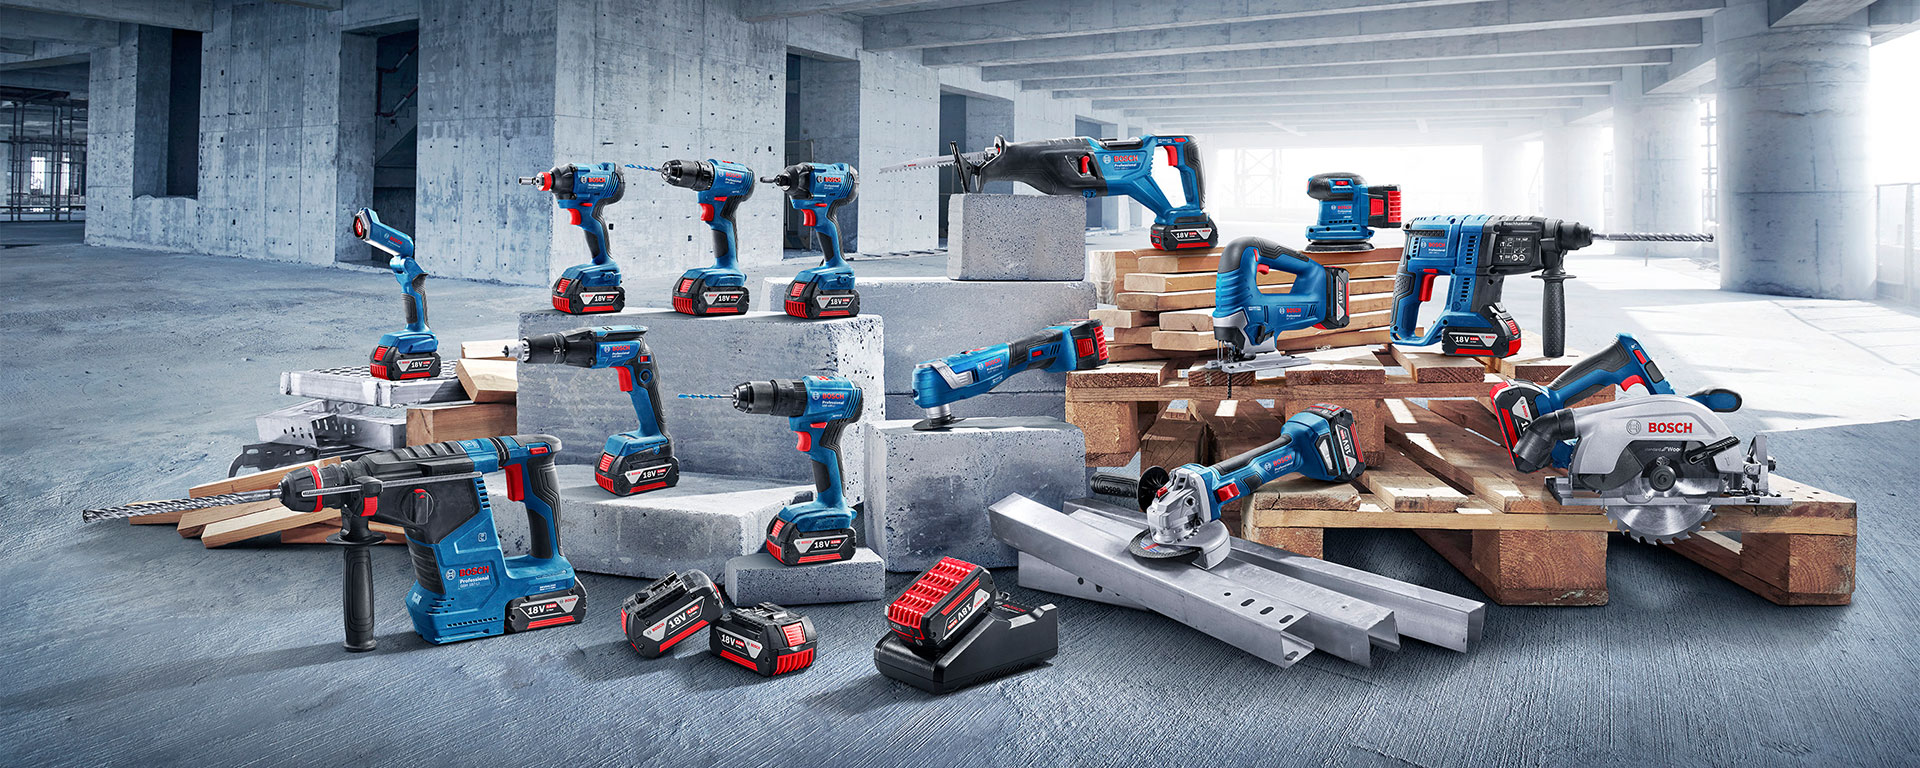 Proportional sekstant Leia Bosch Power Tools | Bosch Professional